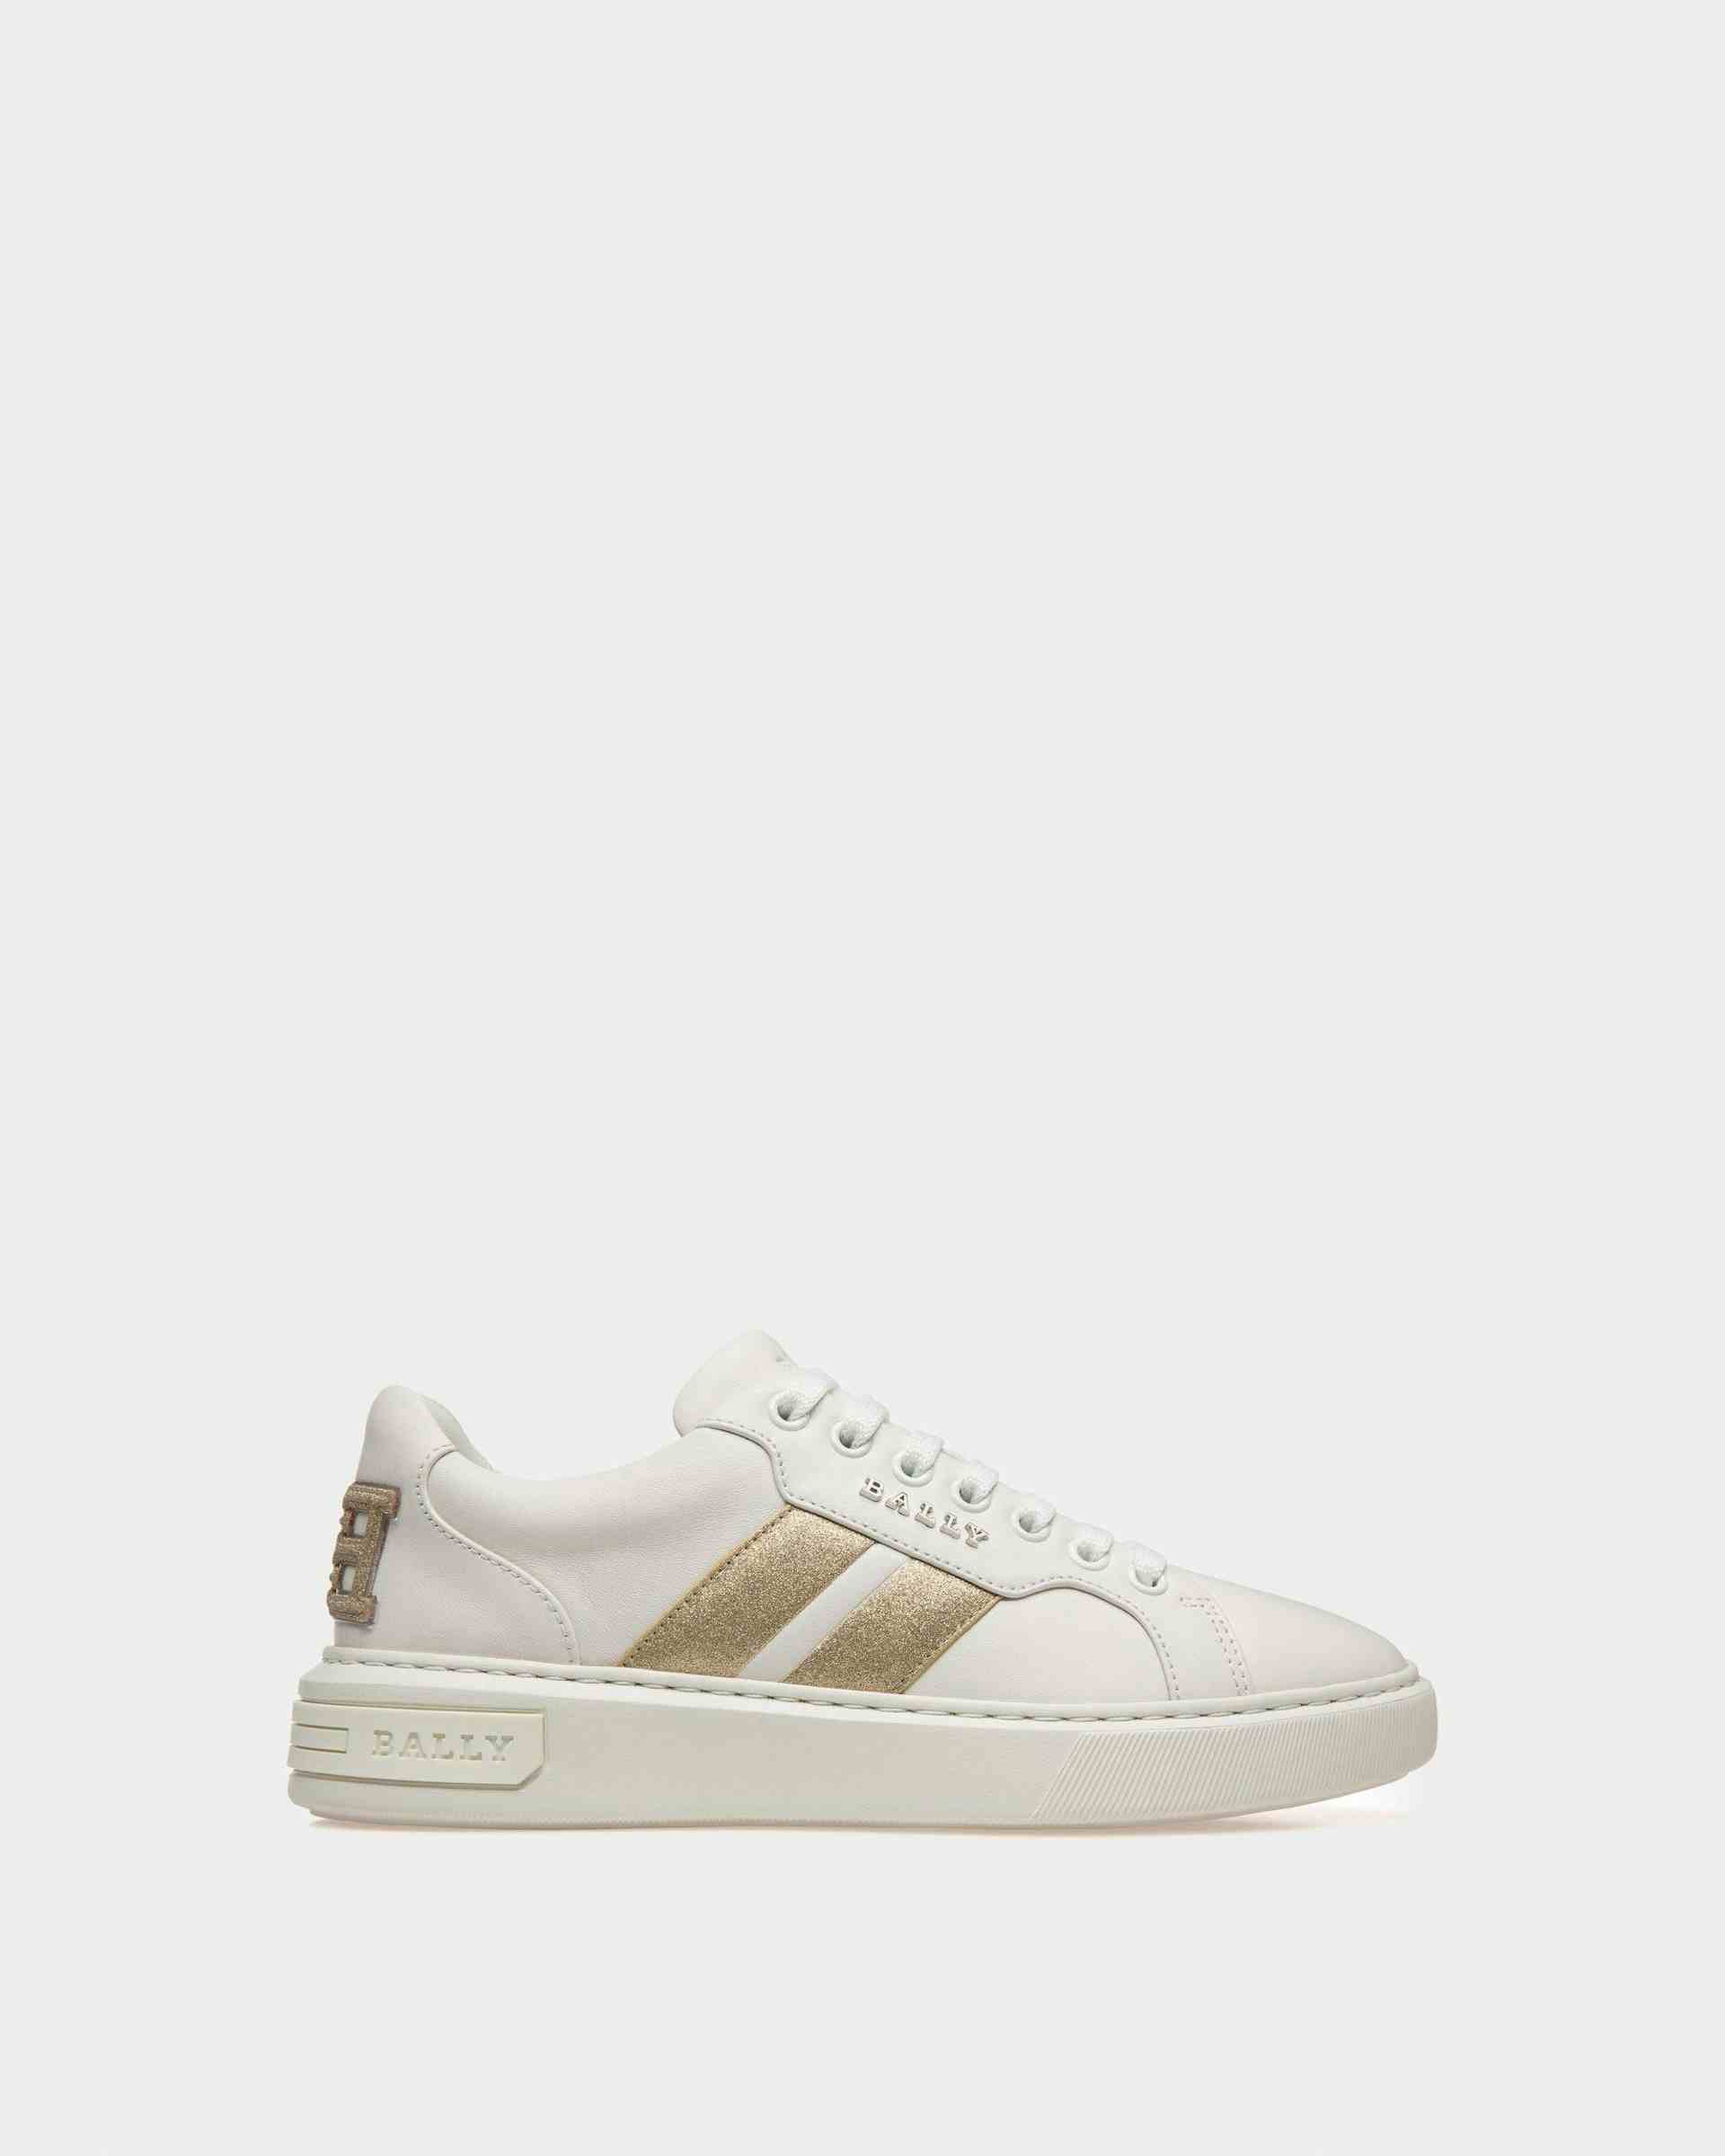 Melany Sneakers In White And Yellow Gold Leather - Women's - Bally